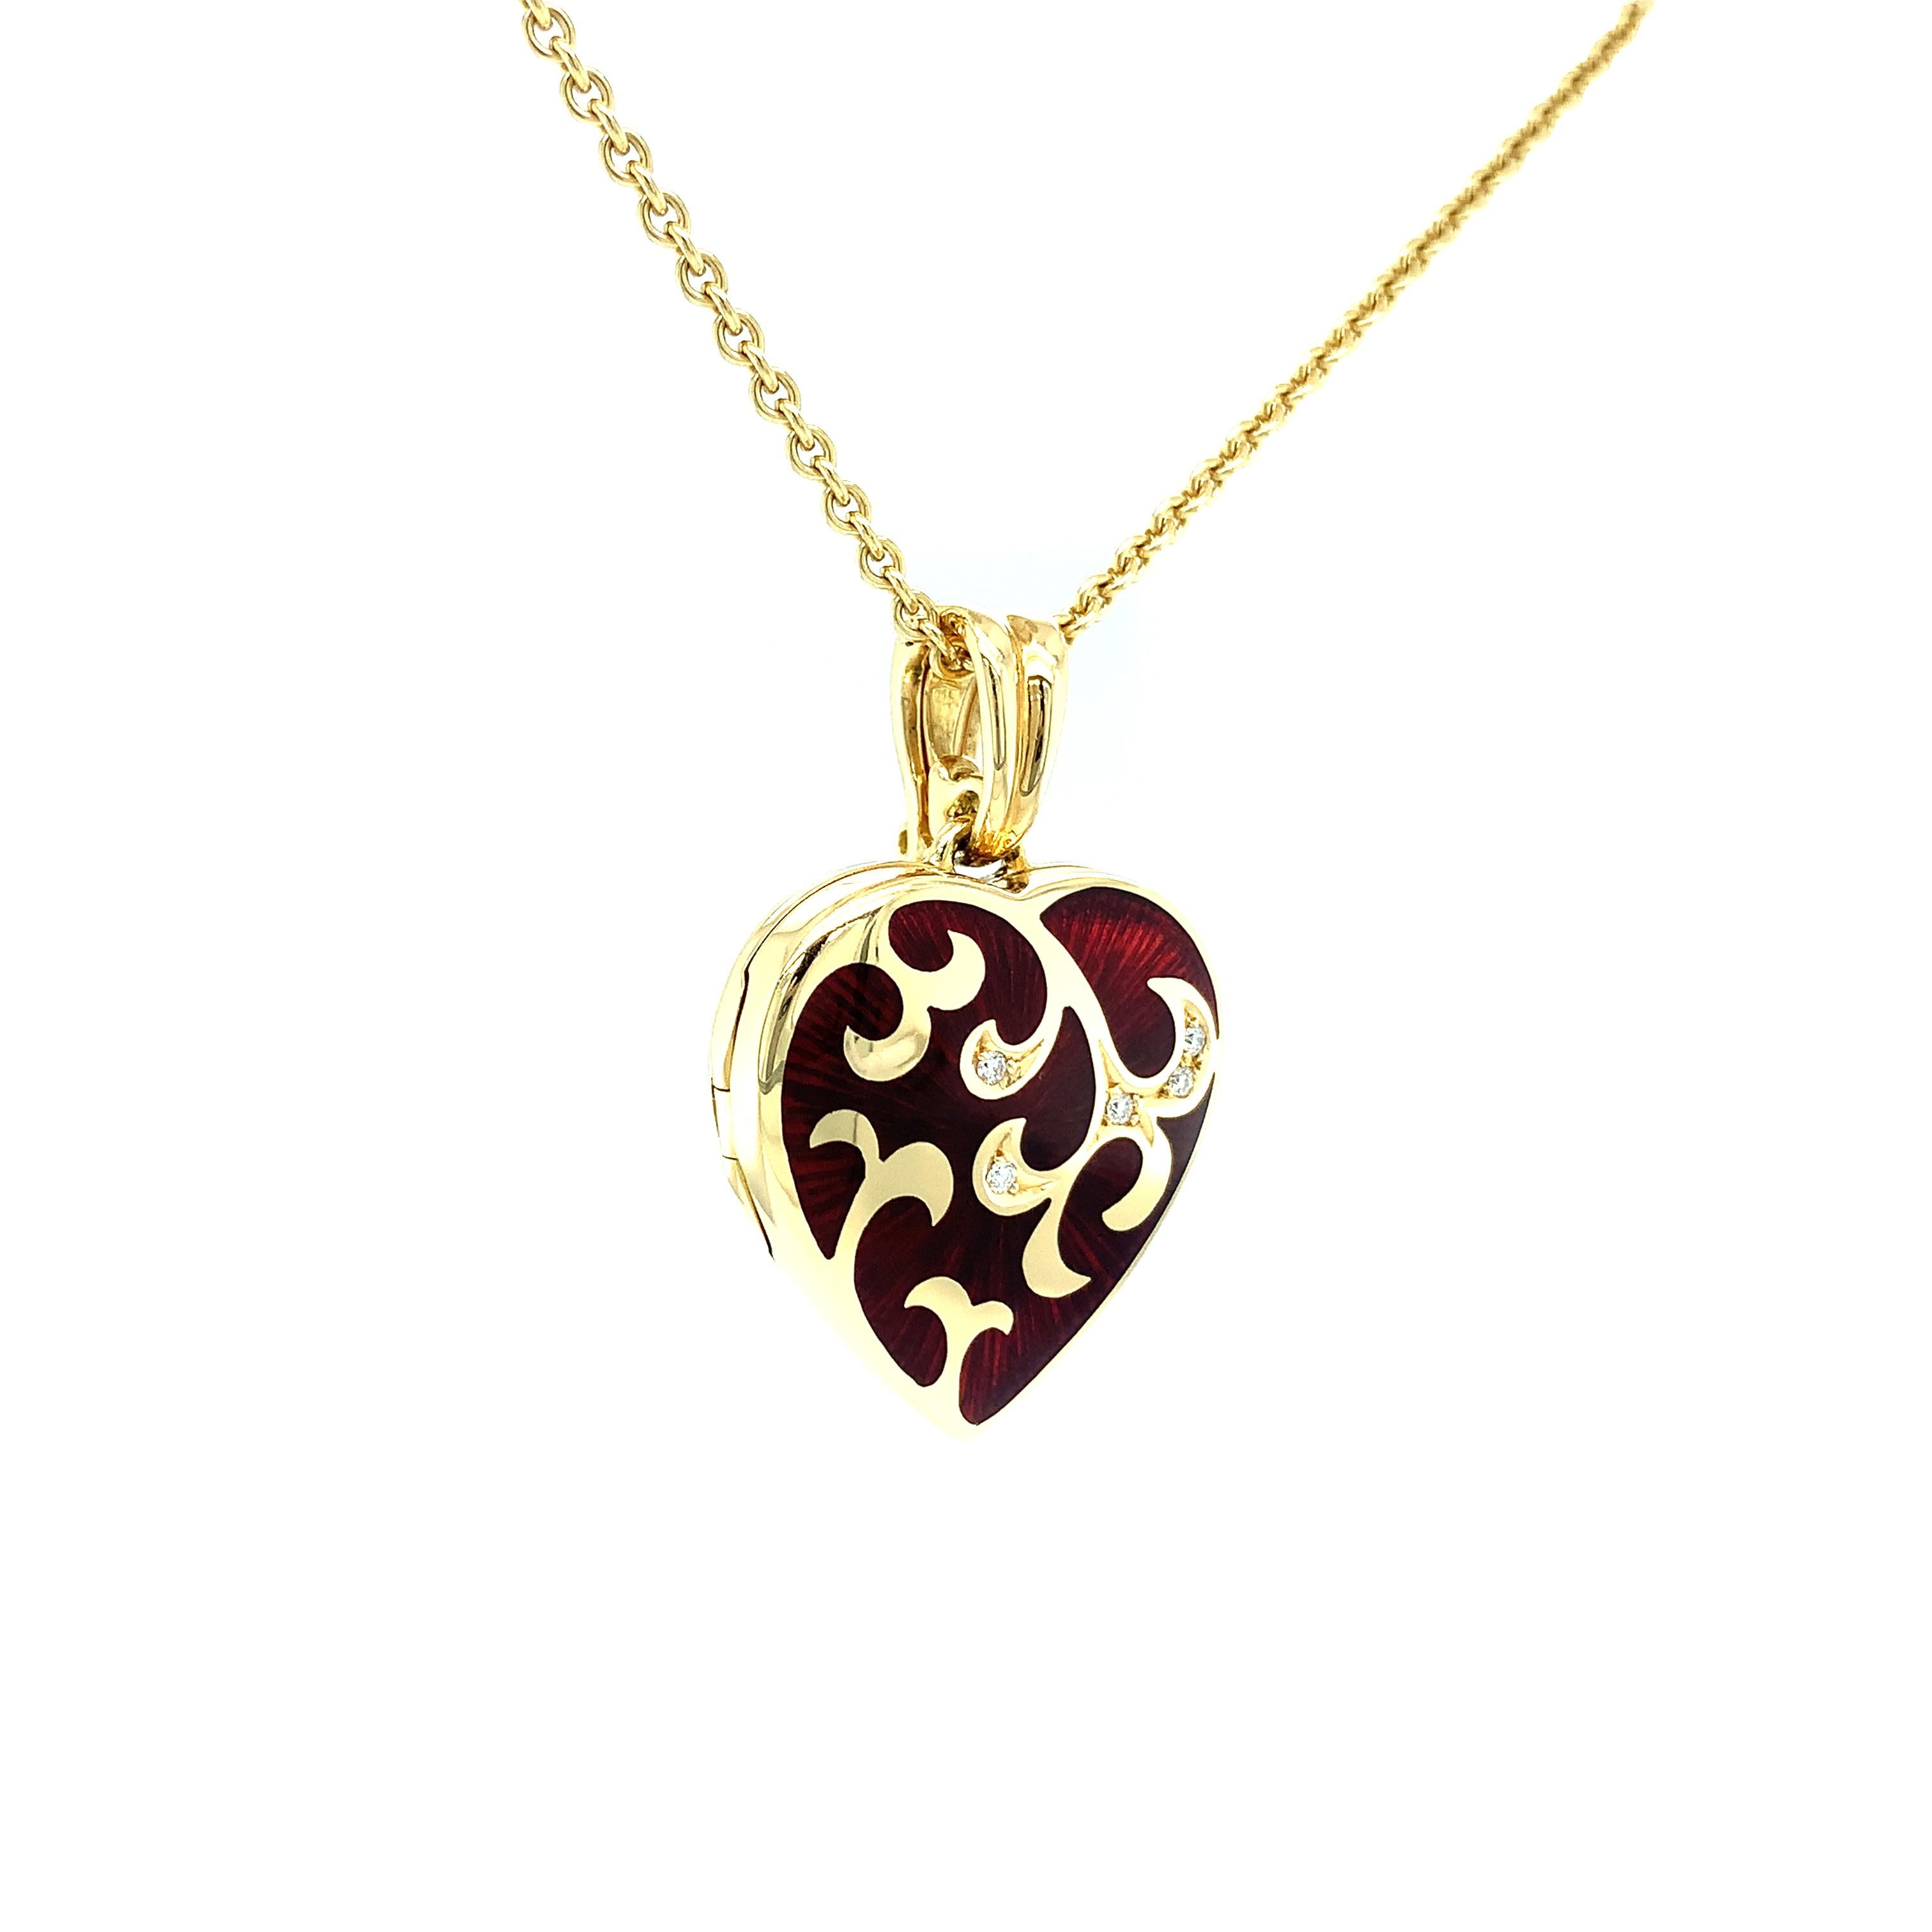 Heart shaped locket pendant, Hallmark Collection by VICTOR MAYER,  18k yellow gold, red vitreous enamel, 5 diamonds, total 0.05 ct, H VS, brilliant cut

About the creator Victor Mayer
Victor Mayer is internationally renowned for elegant timeless